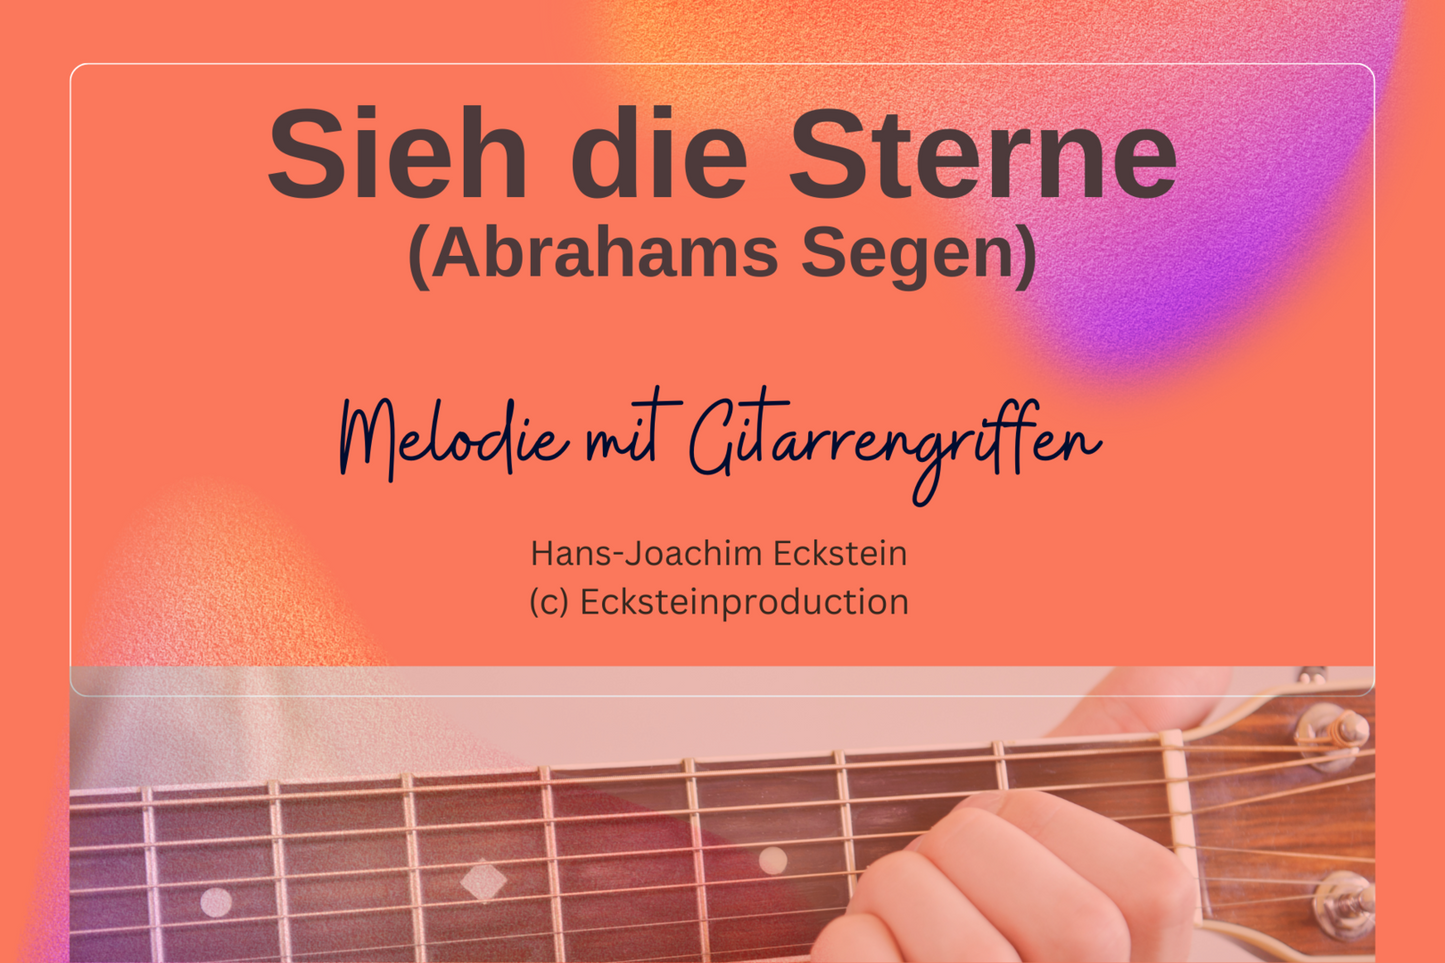 See the stars Abraham's blessing (melody with guitar chords) Hans-Joachim Eckstein